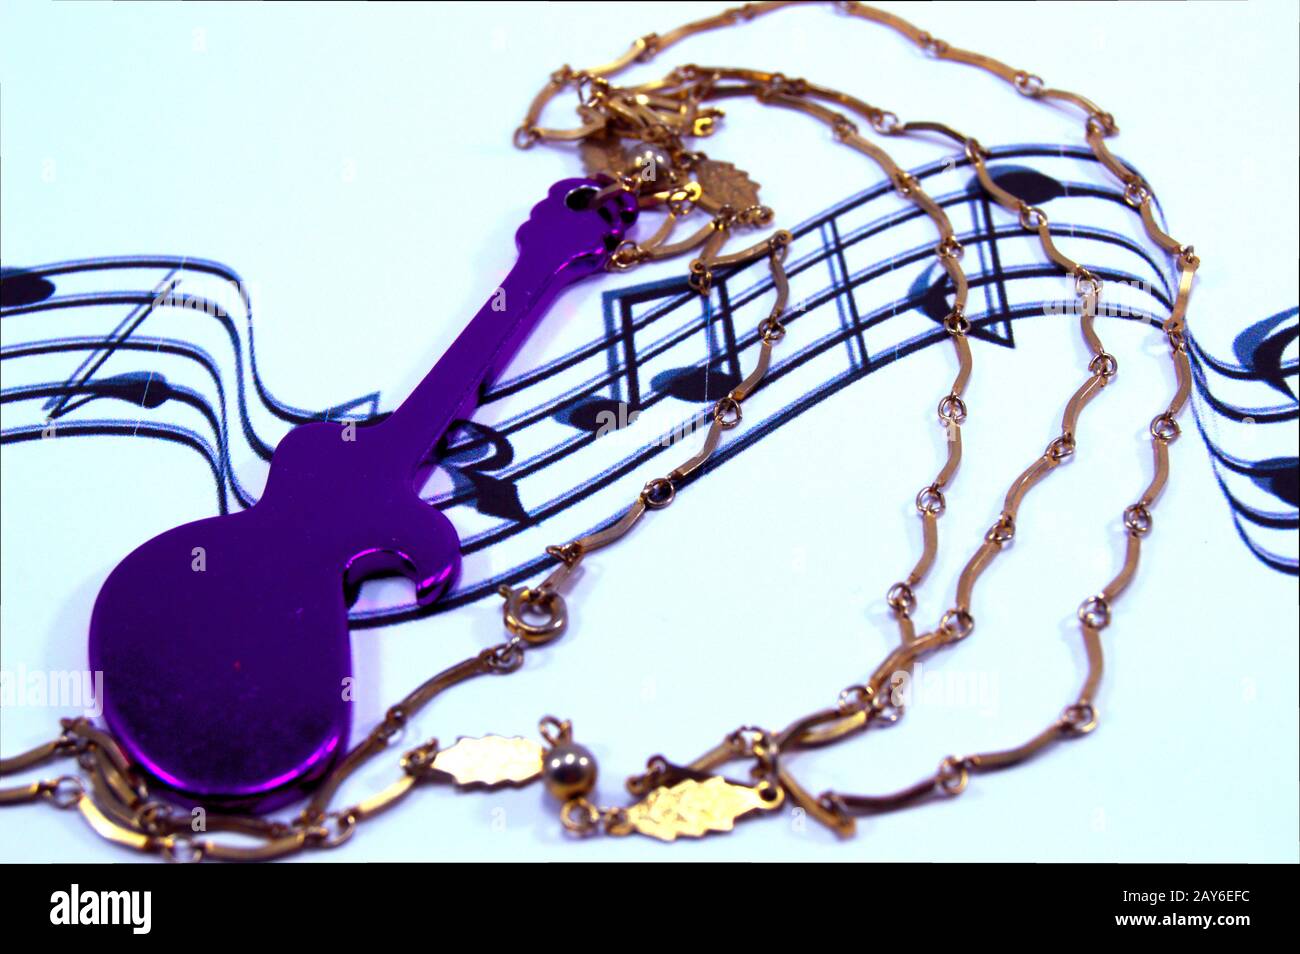 Guitar of mauve color with a chain rests on musical notes. Stock Photo